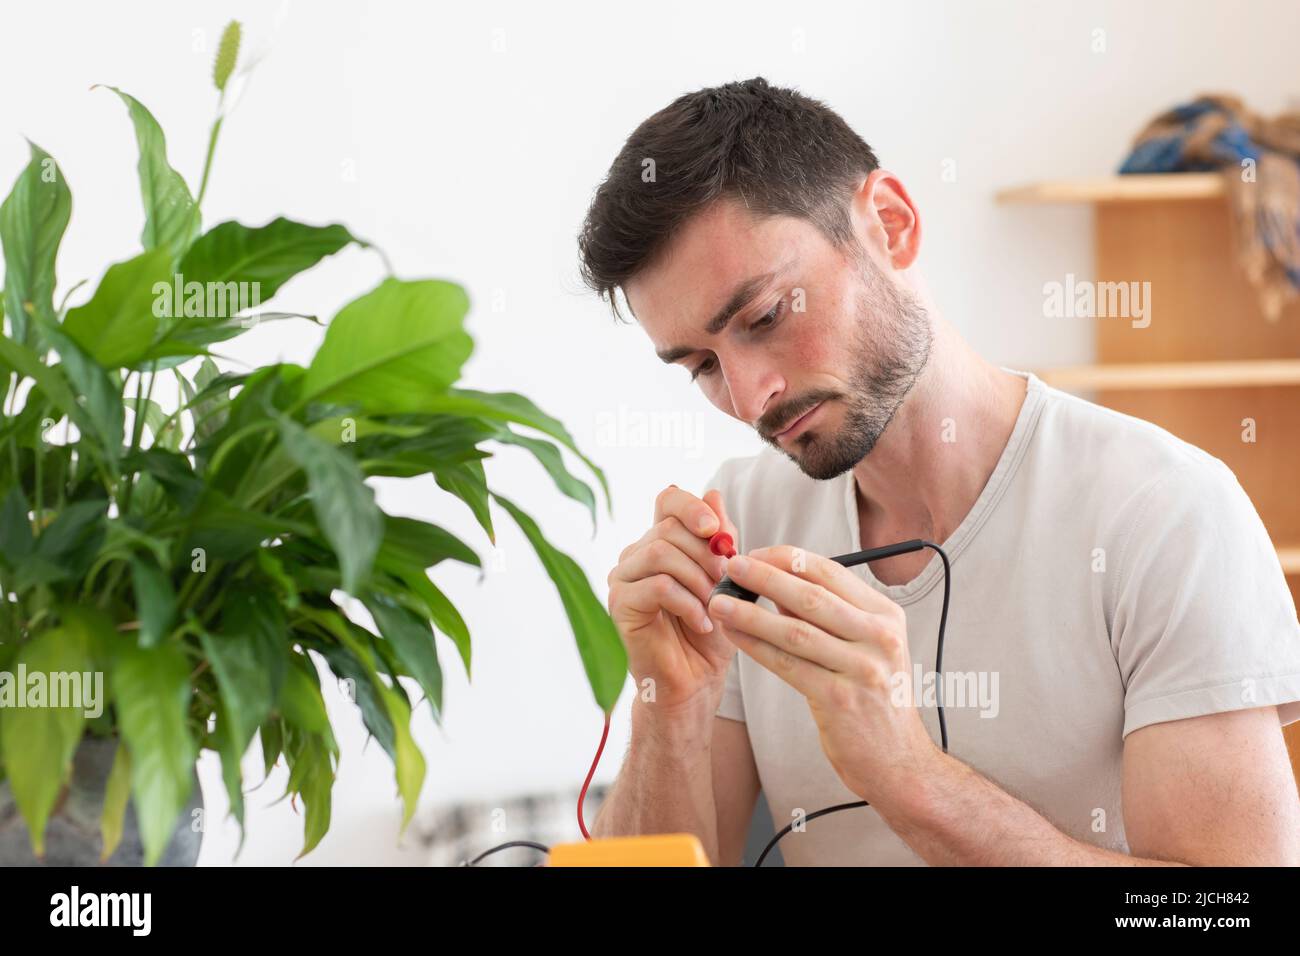 young man working sustained in a room with plant Stock Photo